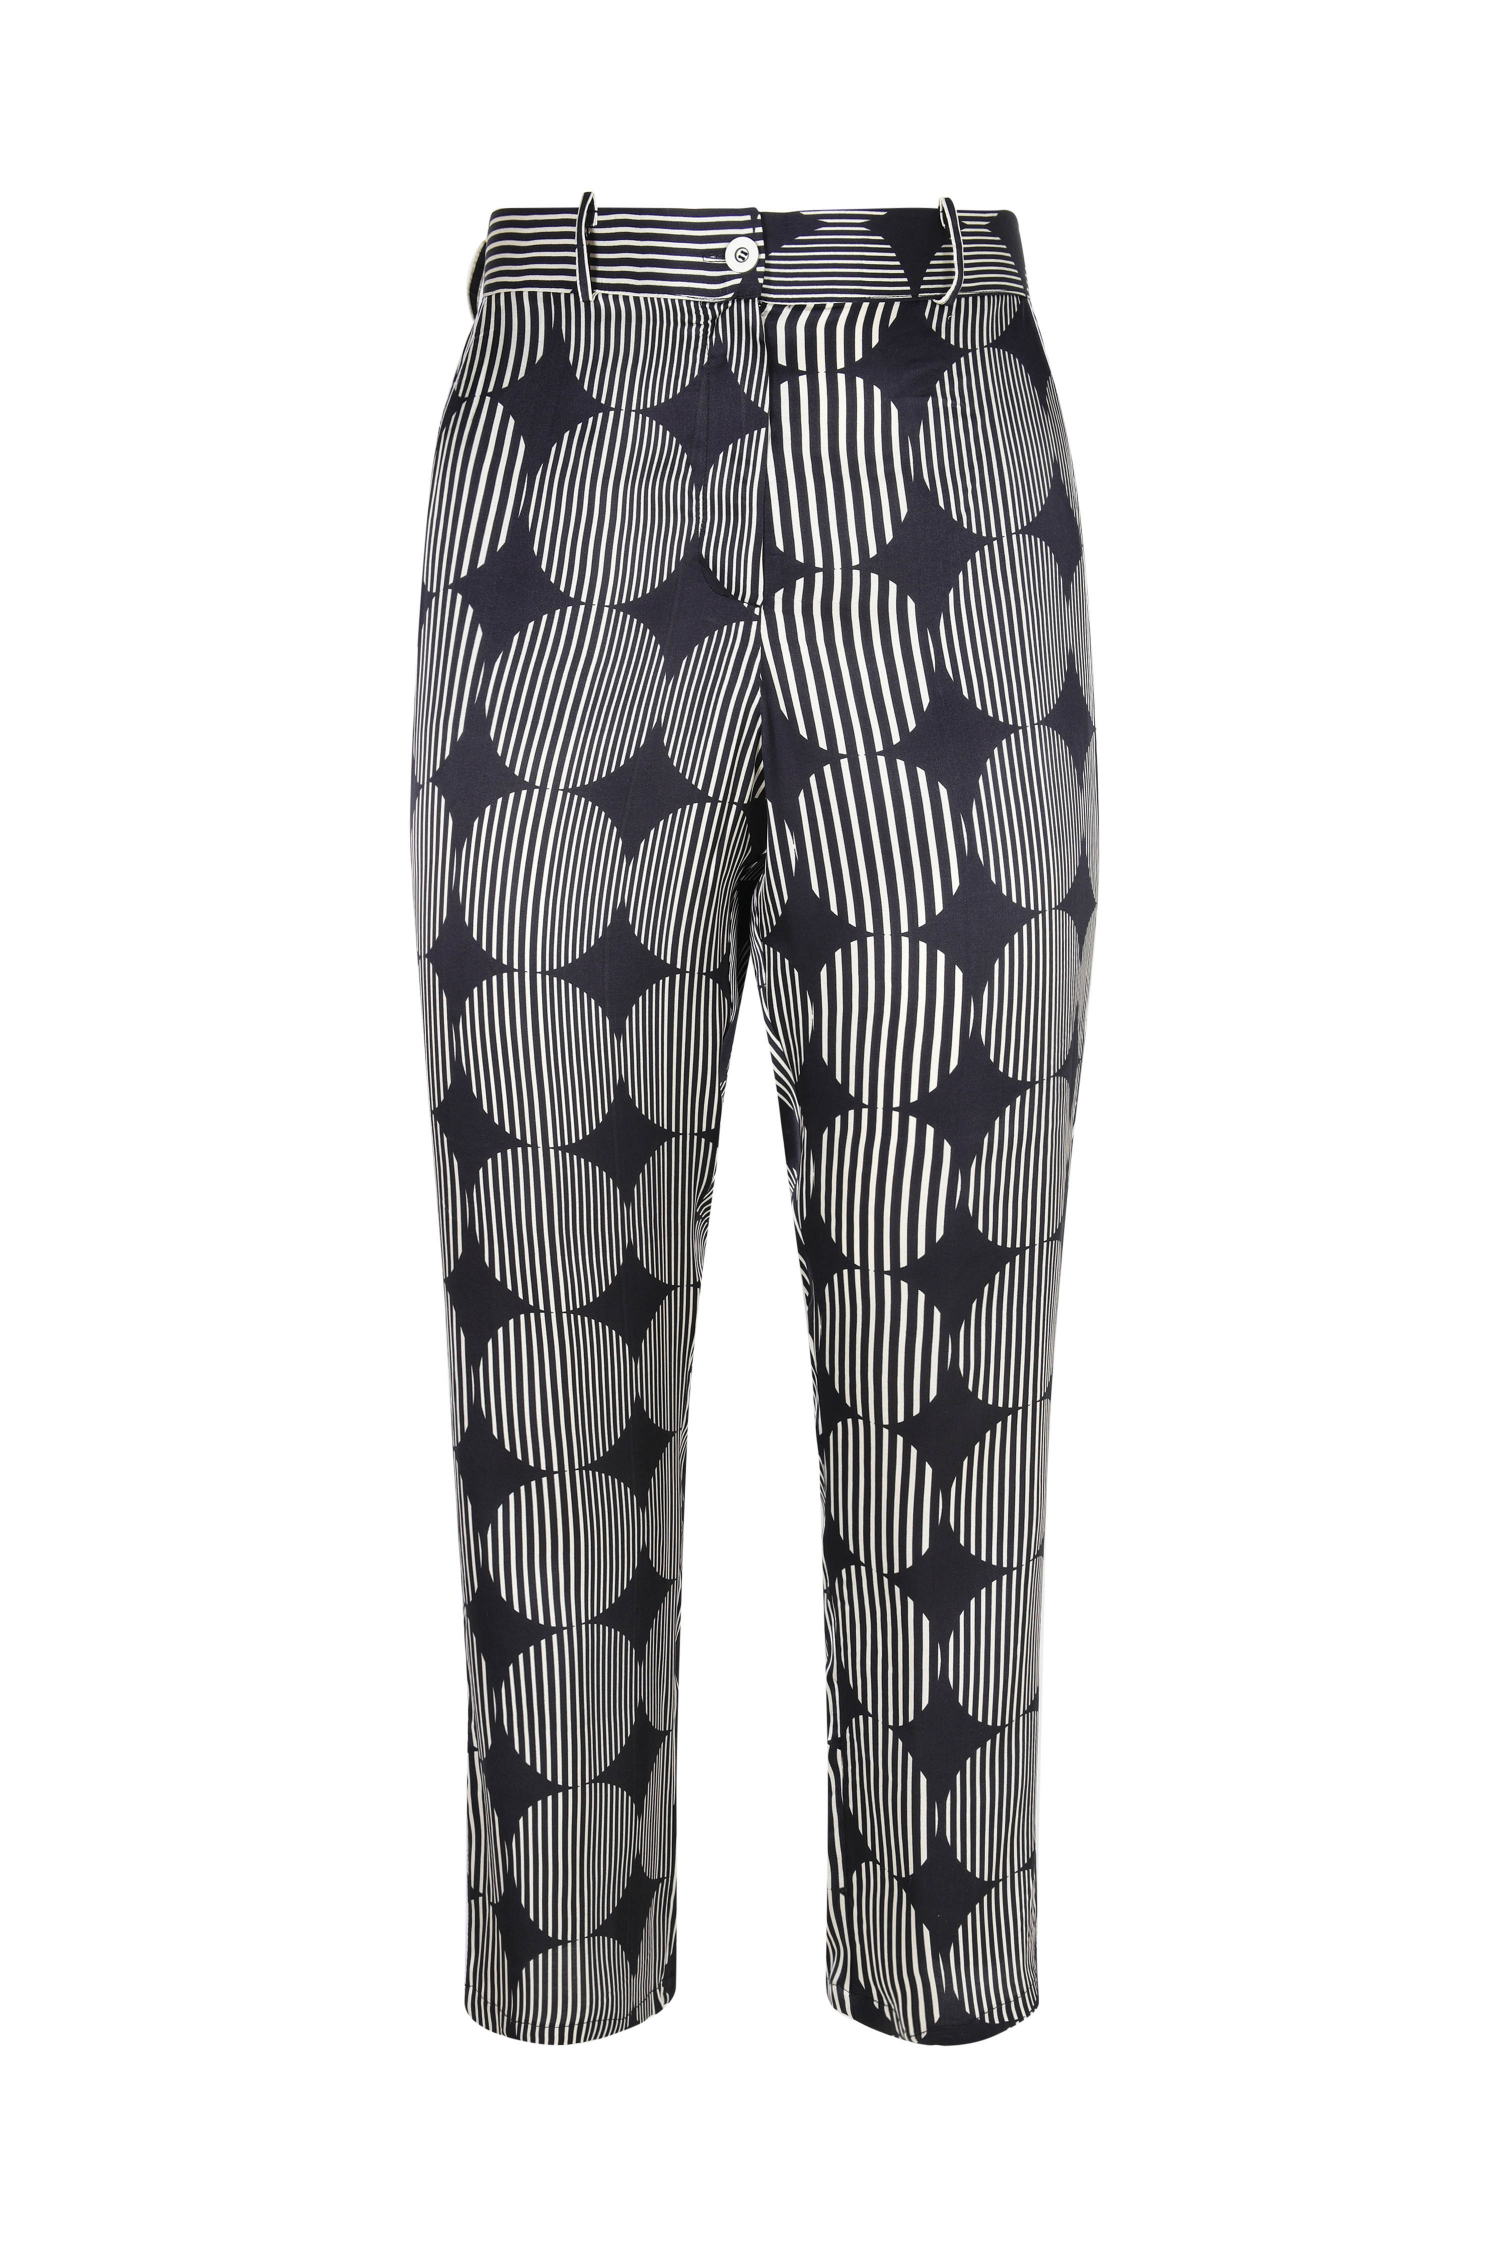 Printed pants with side piping